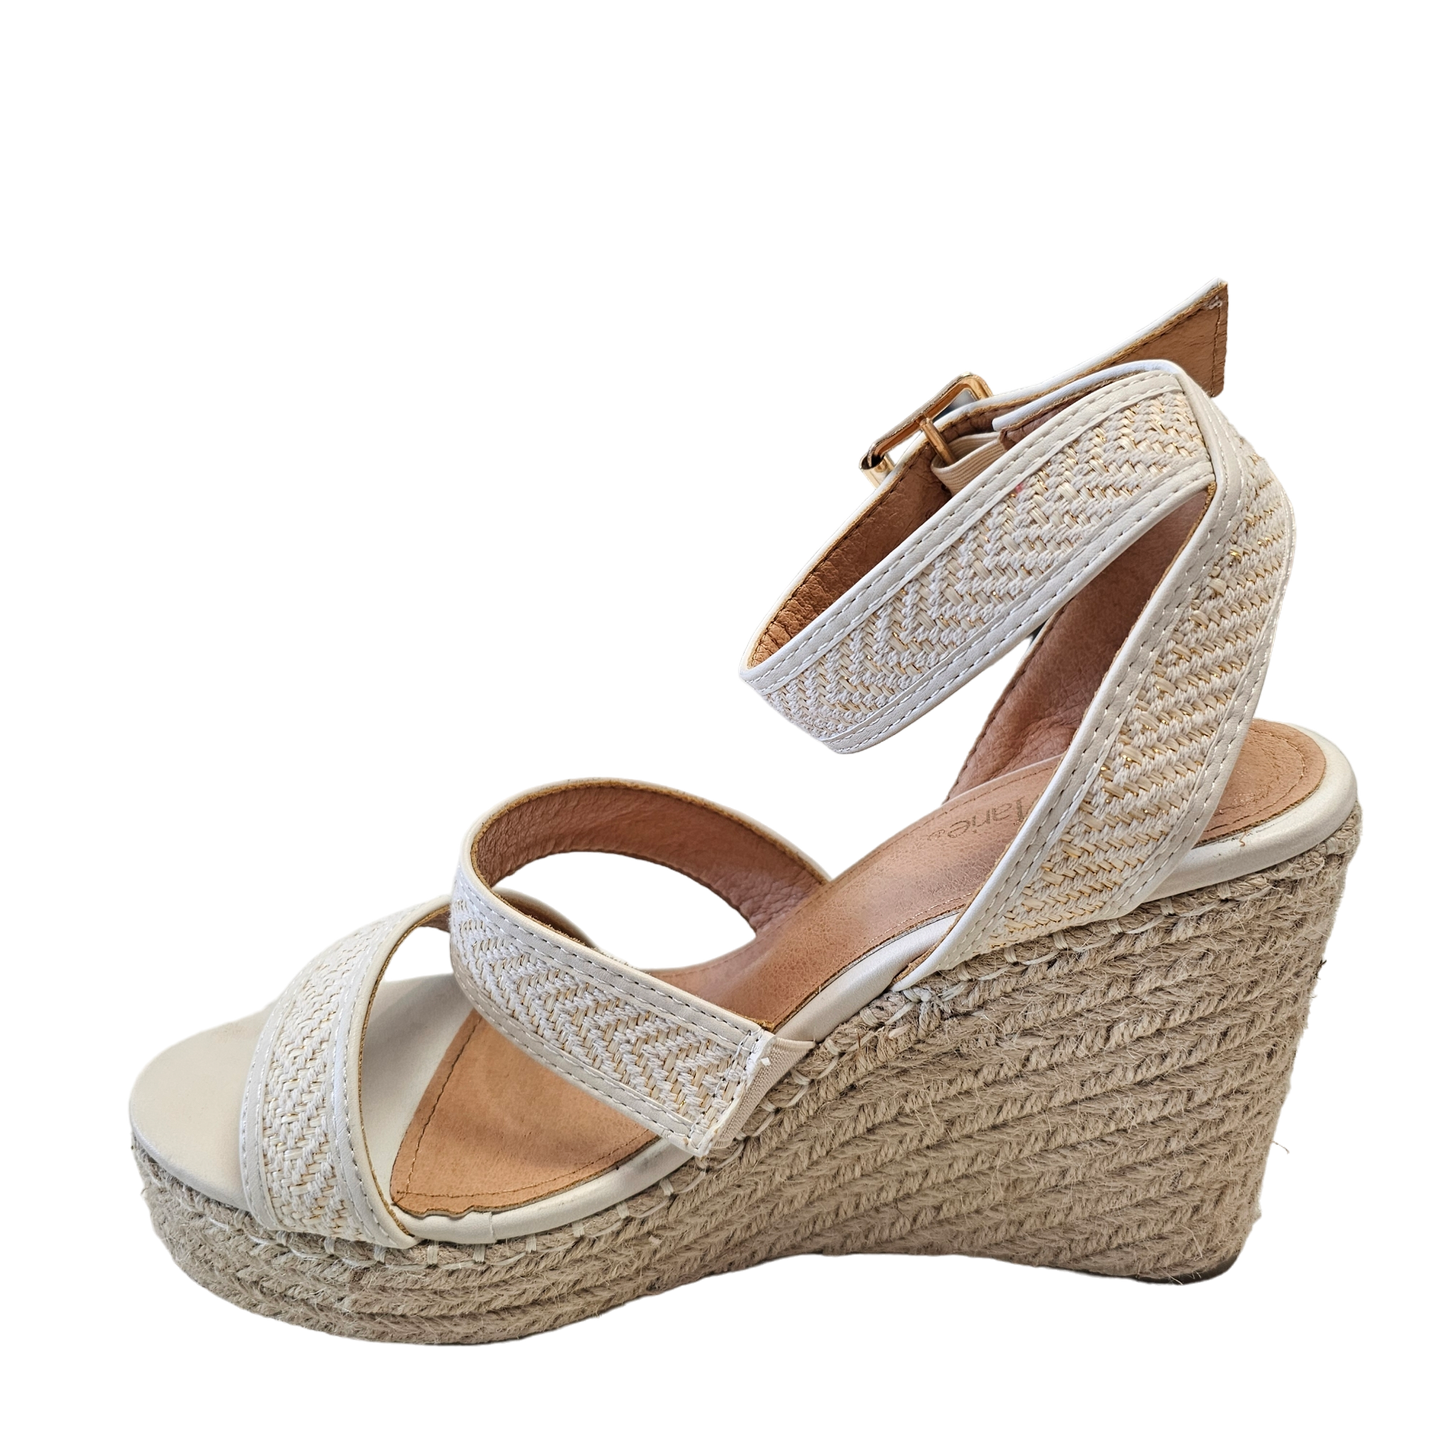 Shoes Heels Wedge By bella marie Size: 10